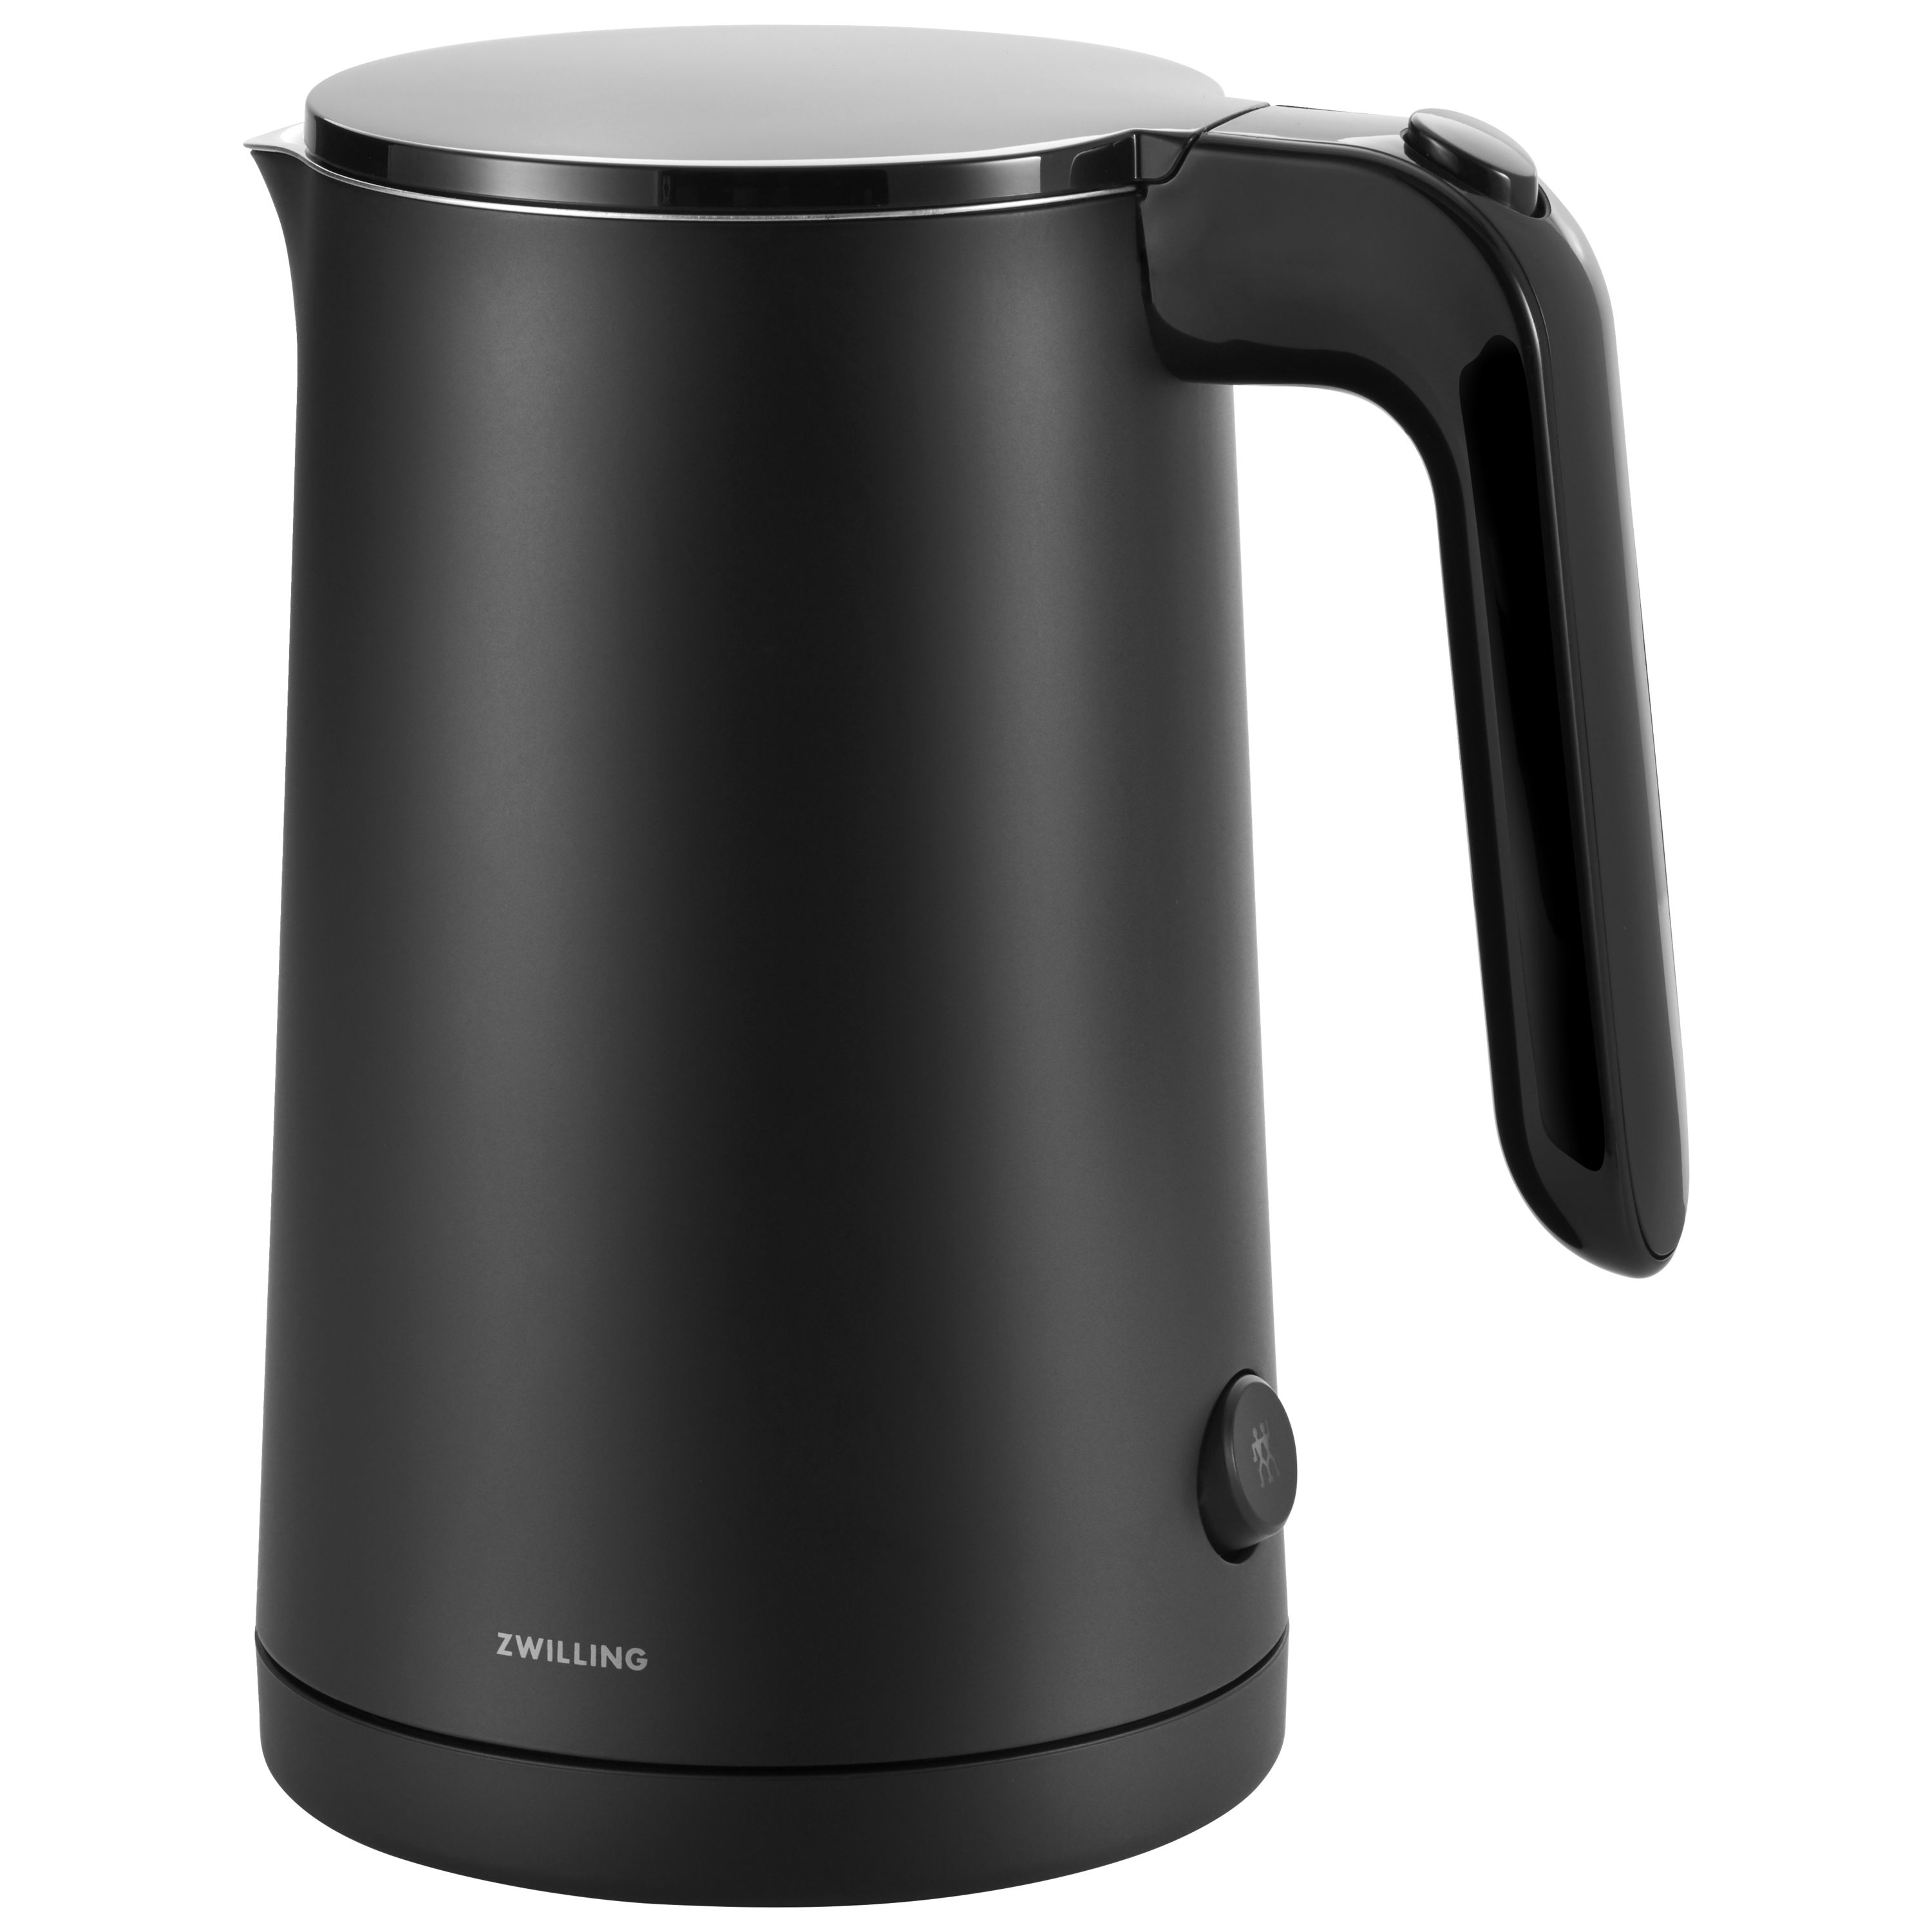 Bella Ceramic Electric Kettle Electric Kettle Review - Consumer Reports